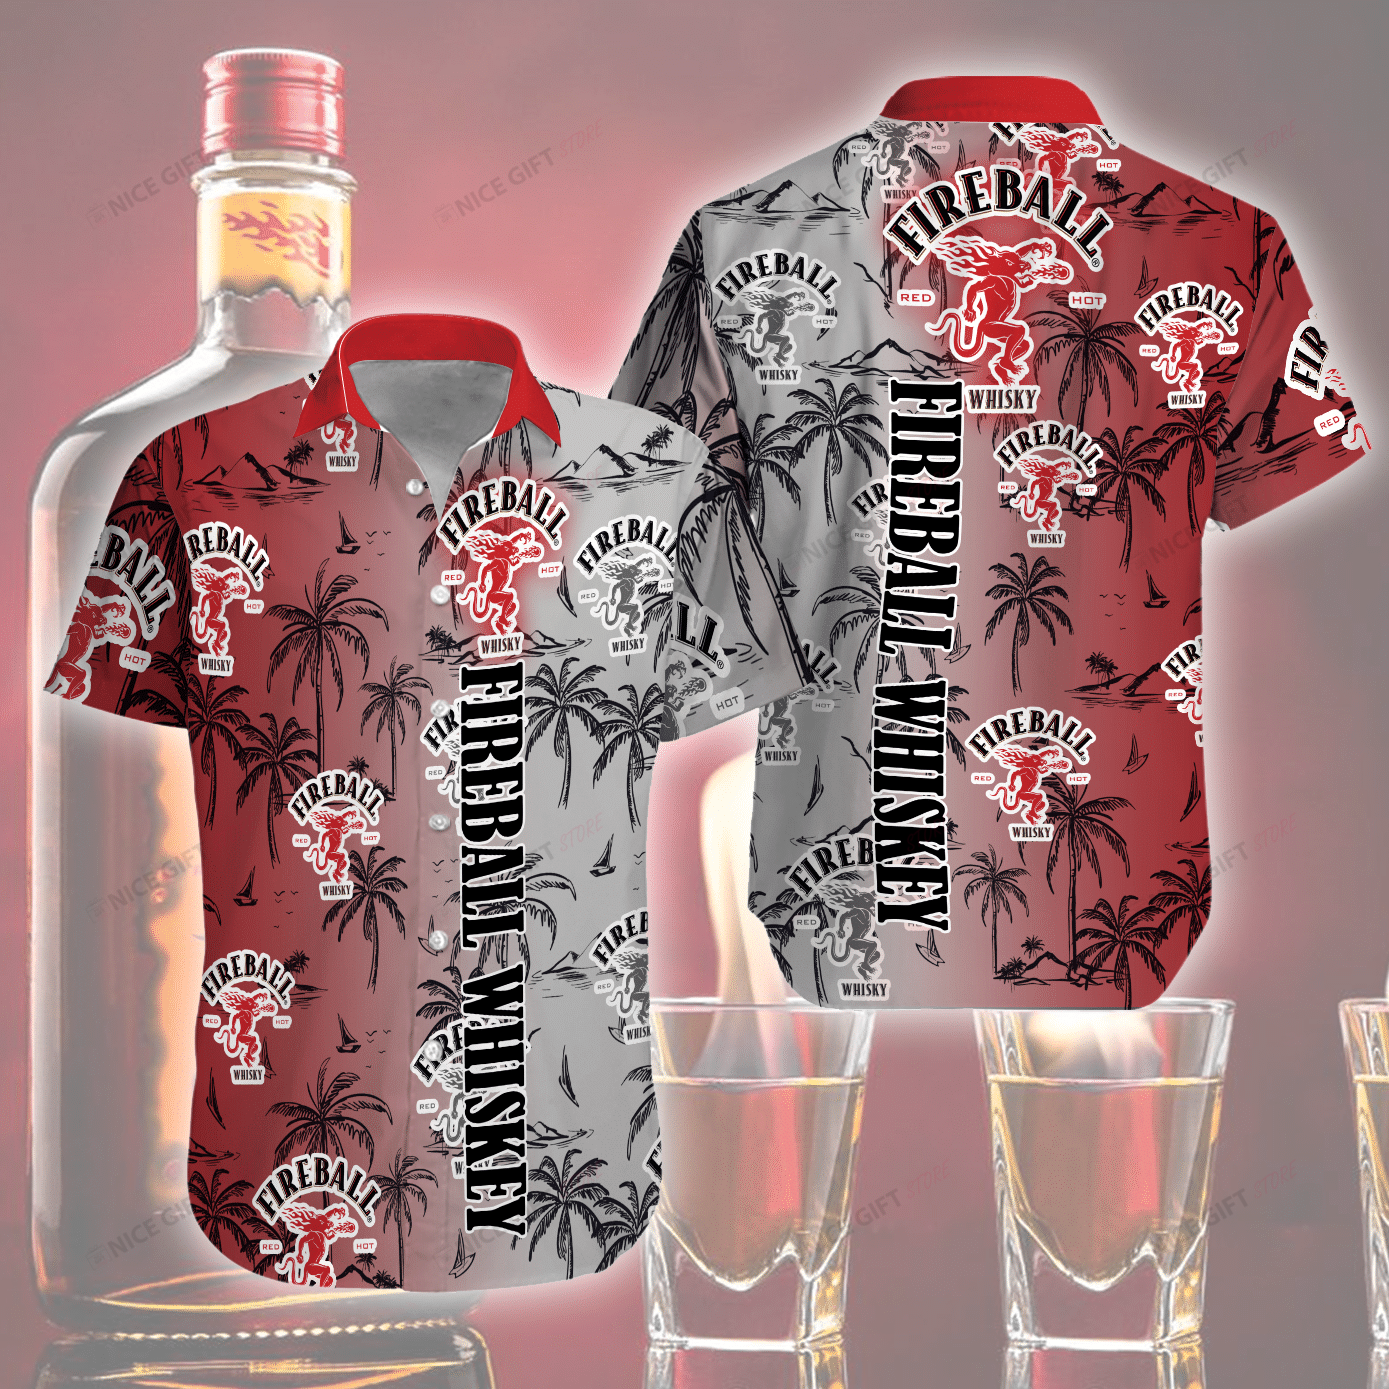 Check out our latest Hawaii Shirt! 16